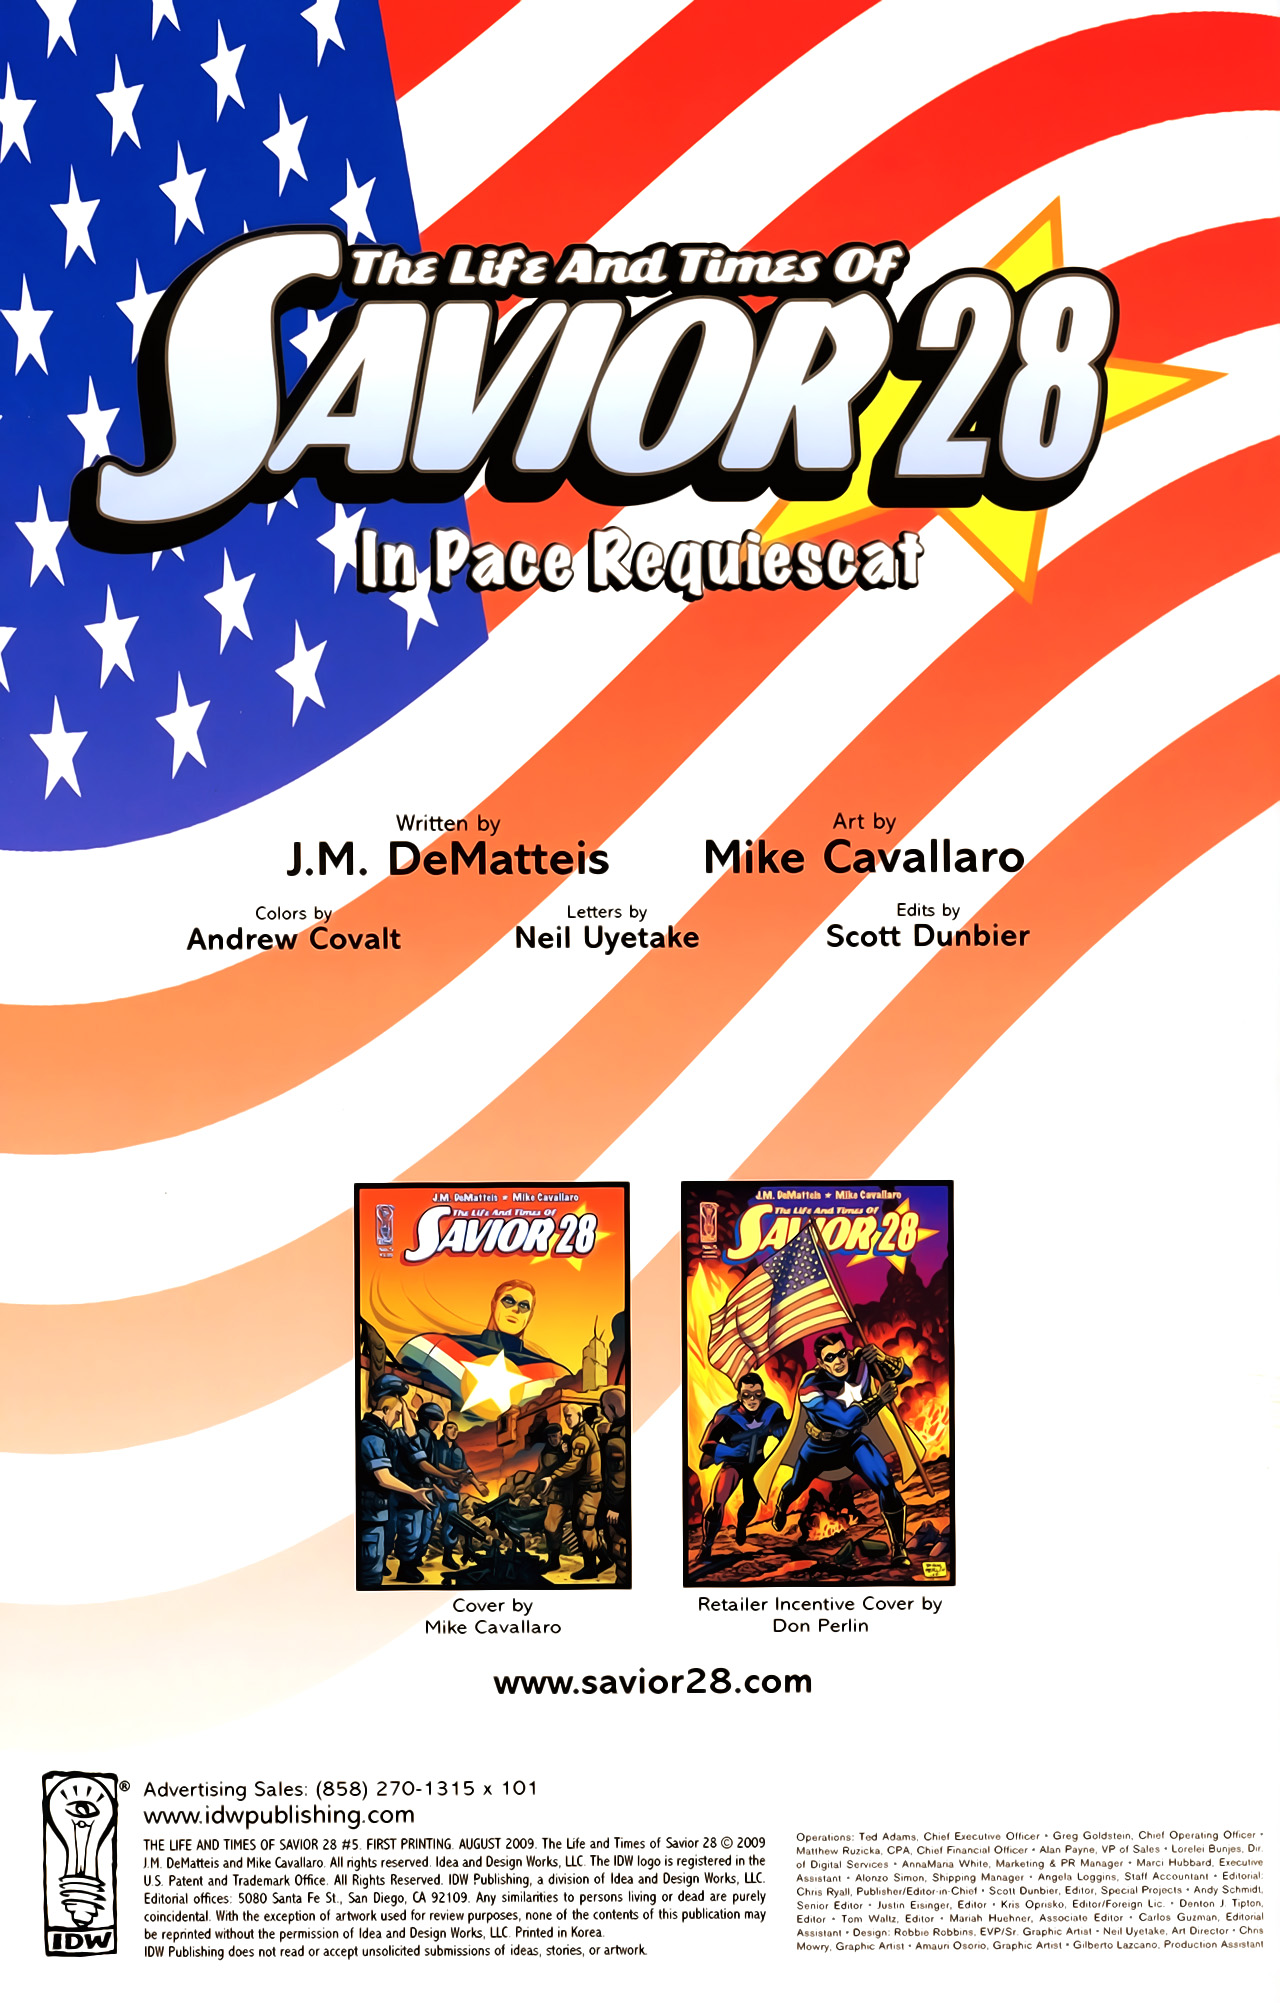 Read online The Life and Times of Savior 28 comic -  Issue #5 - 2